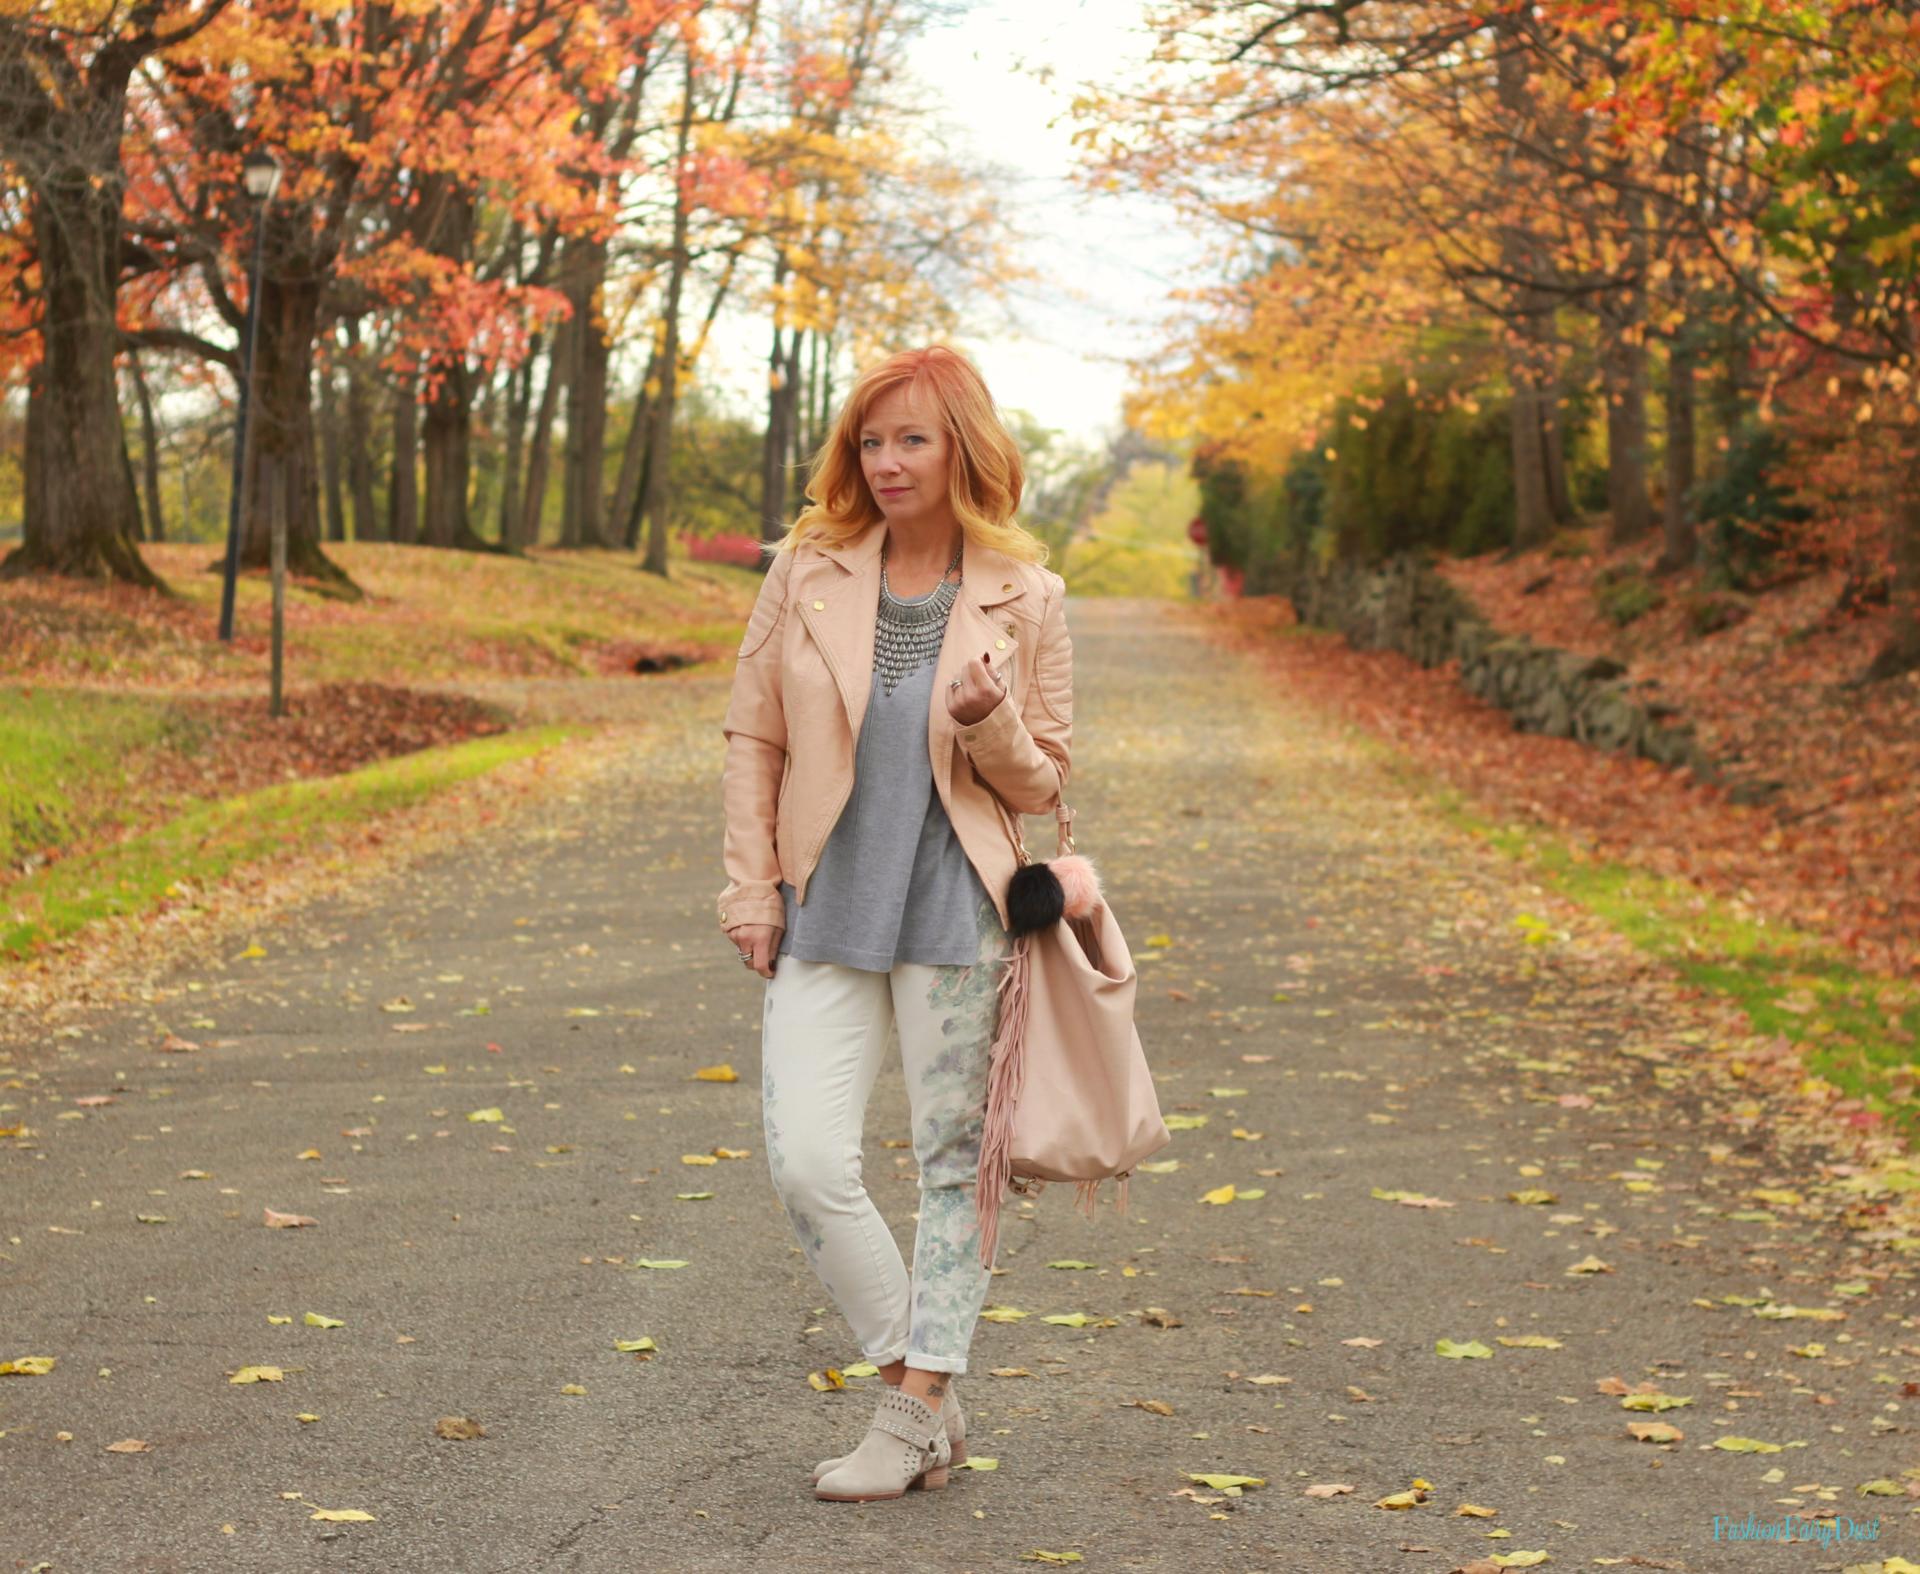 Floral print jeans, pink moto jacket & gray sweater.